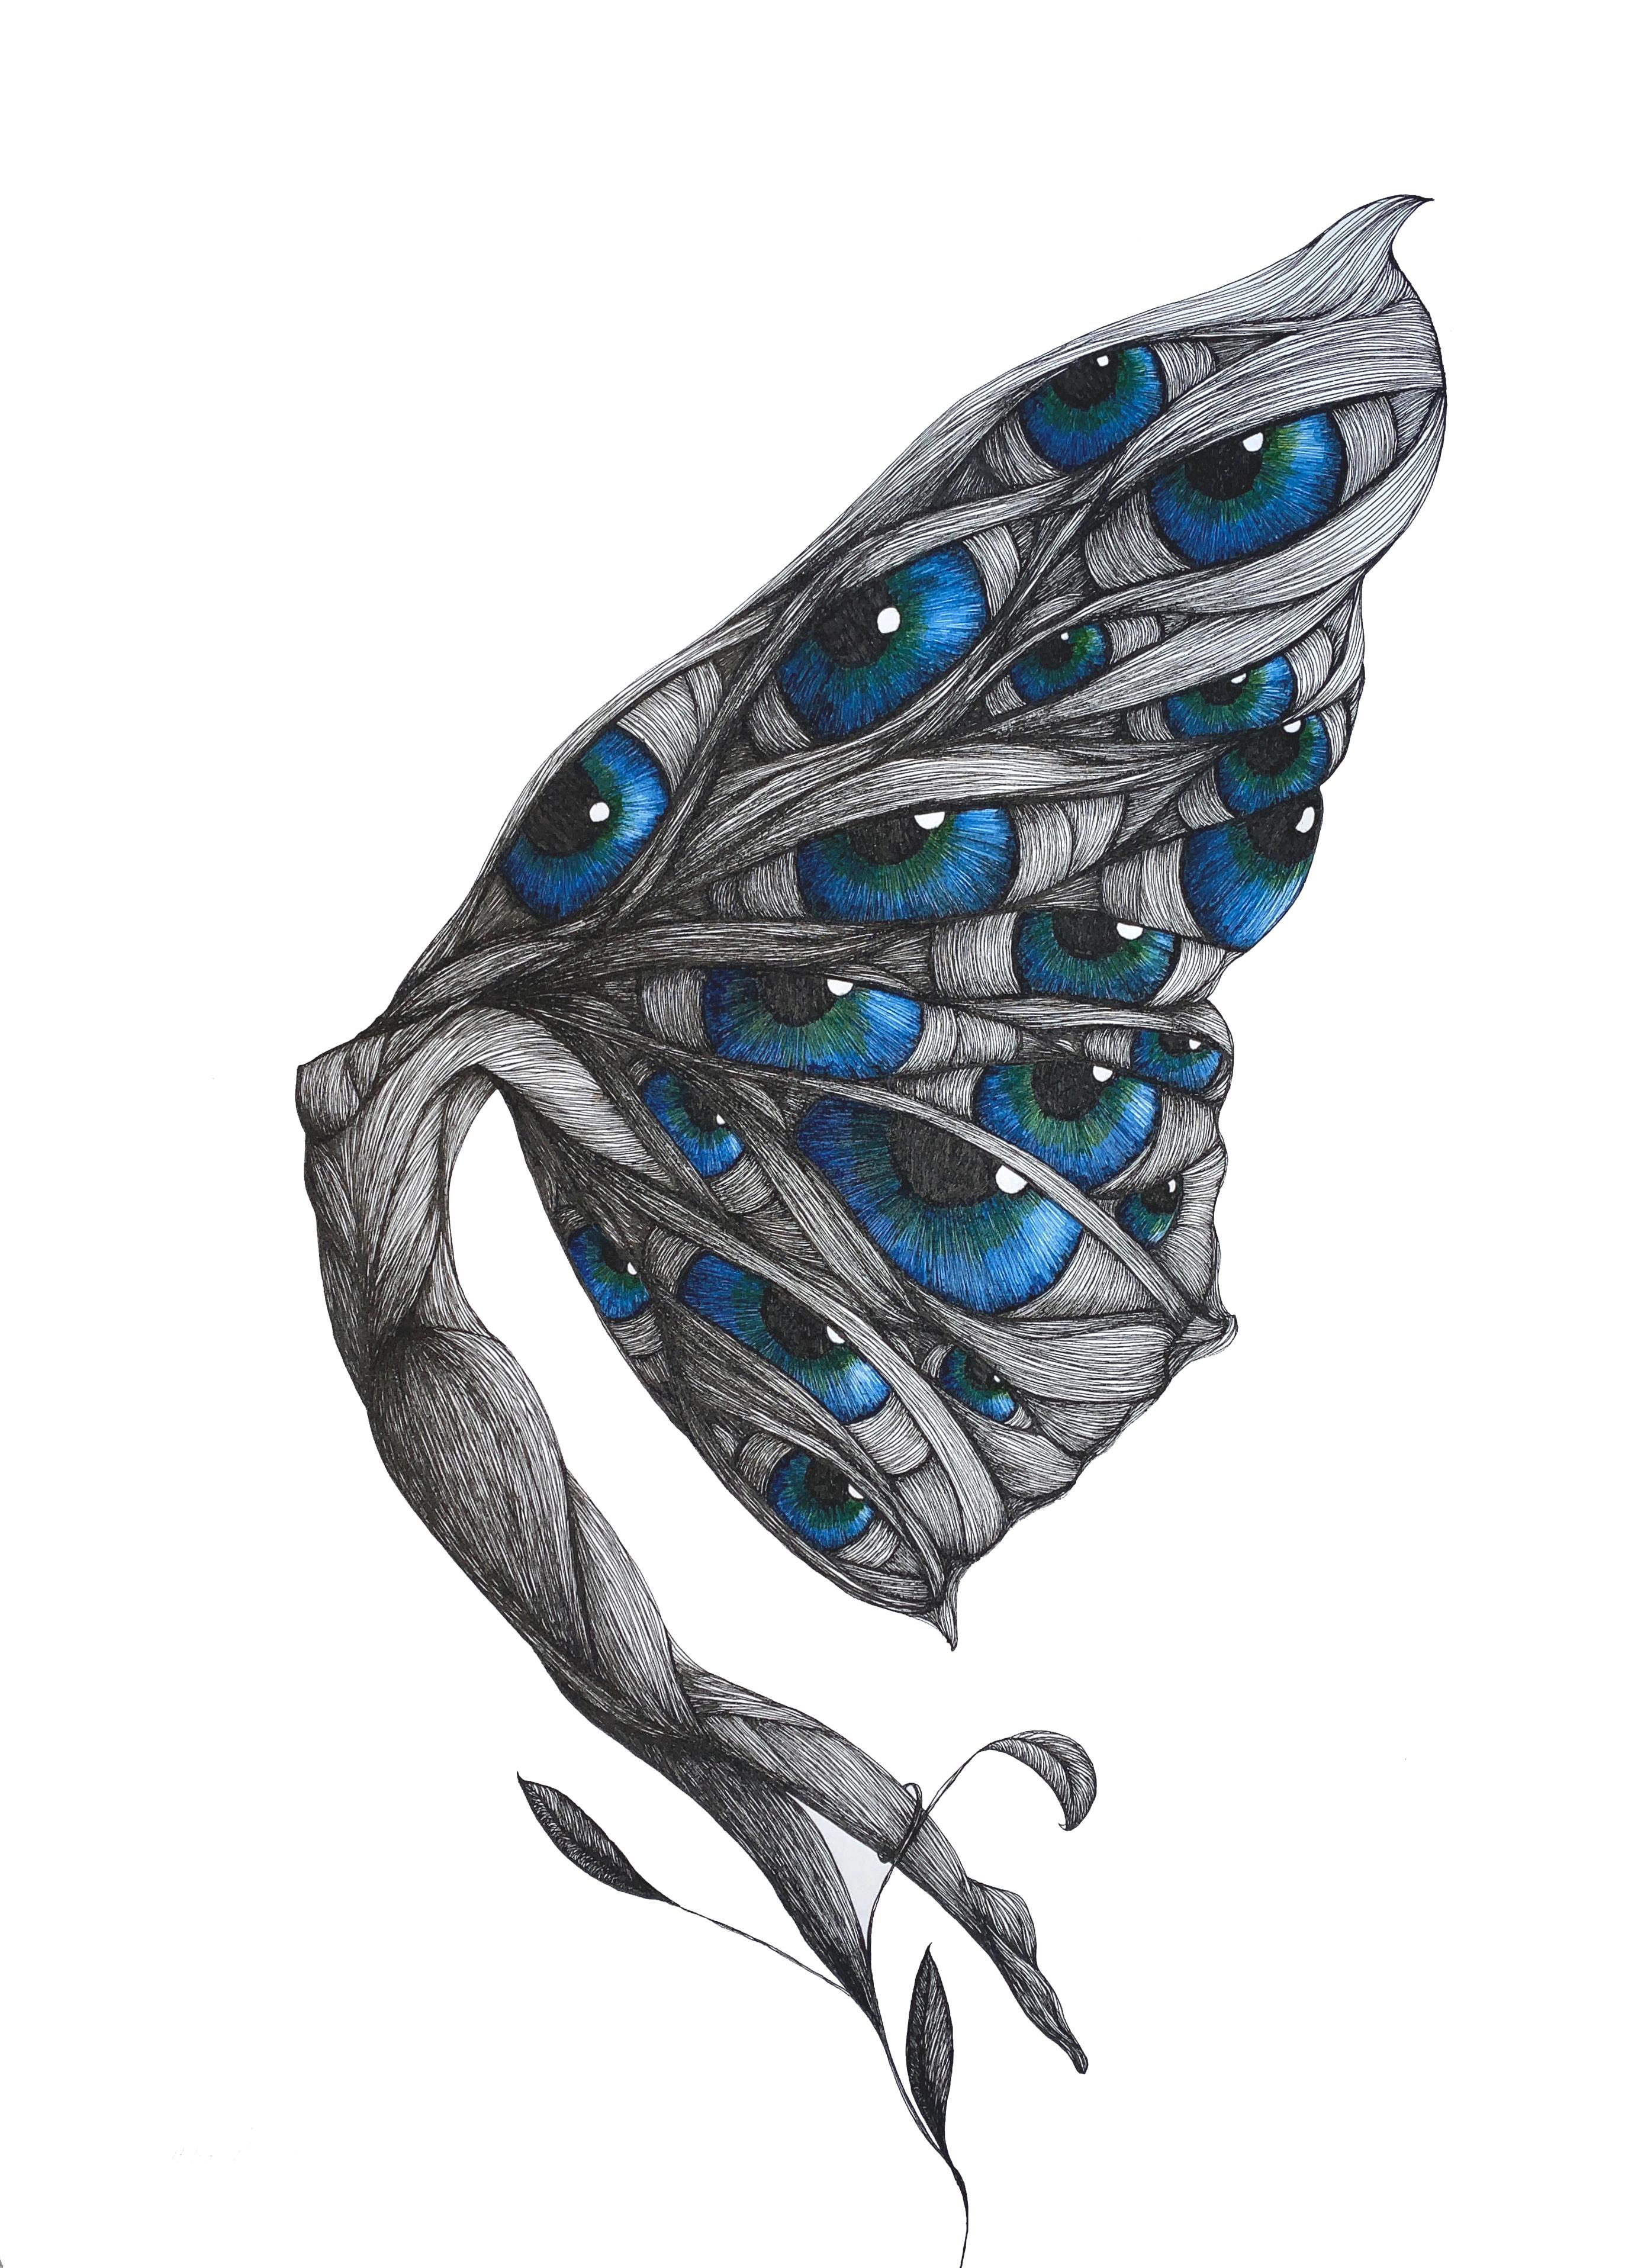 Garden Party VI  - Spectacular Drawing of Winged Female / Butterfly Figure  - Art by Katherine Filice